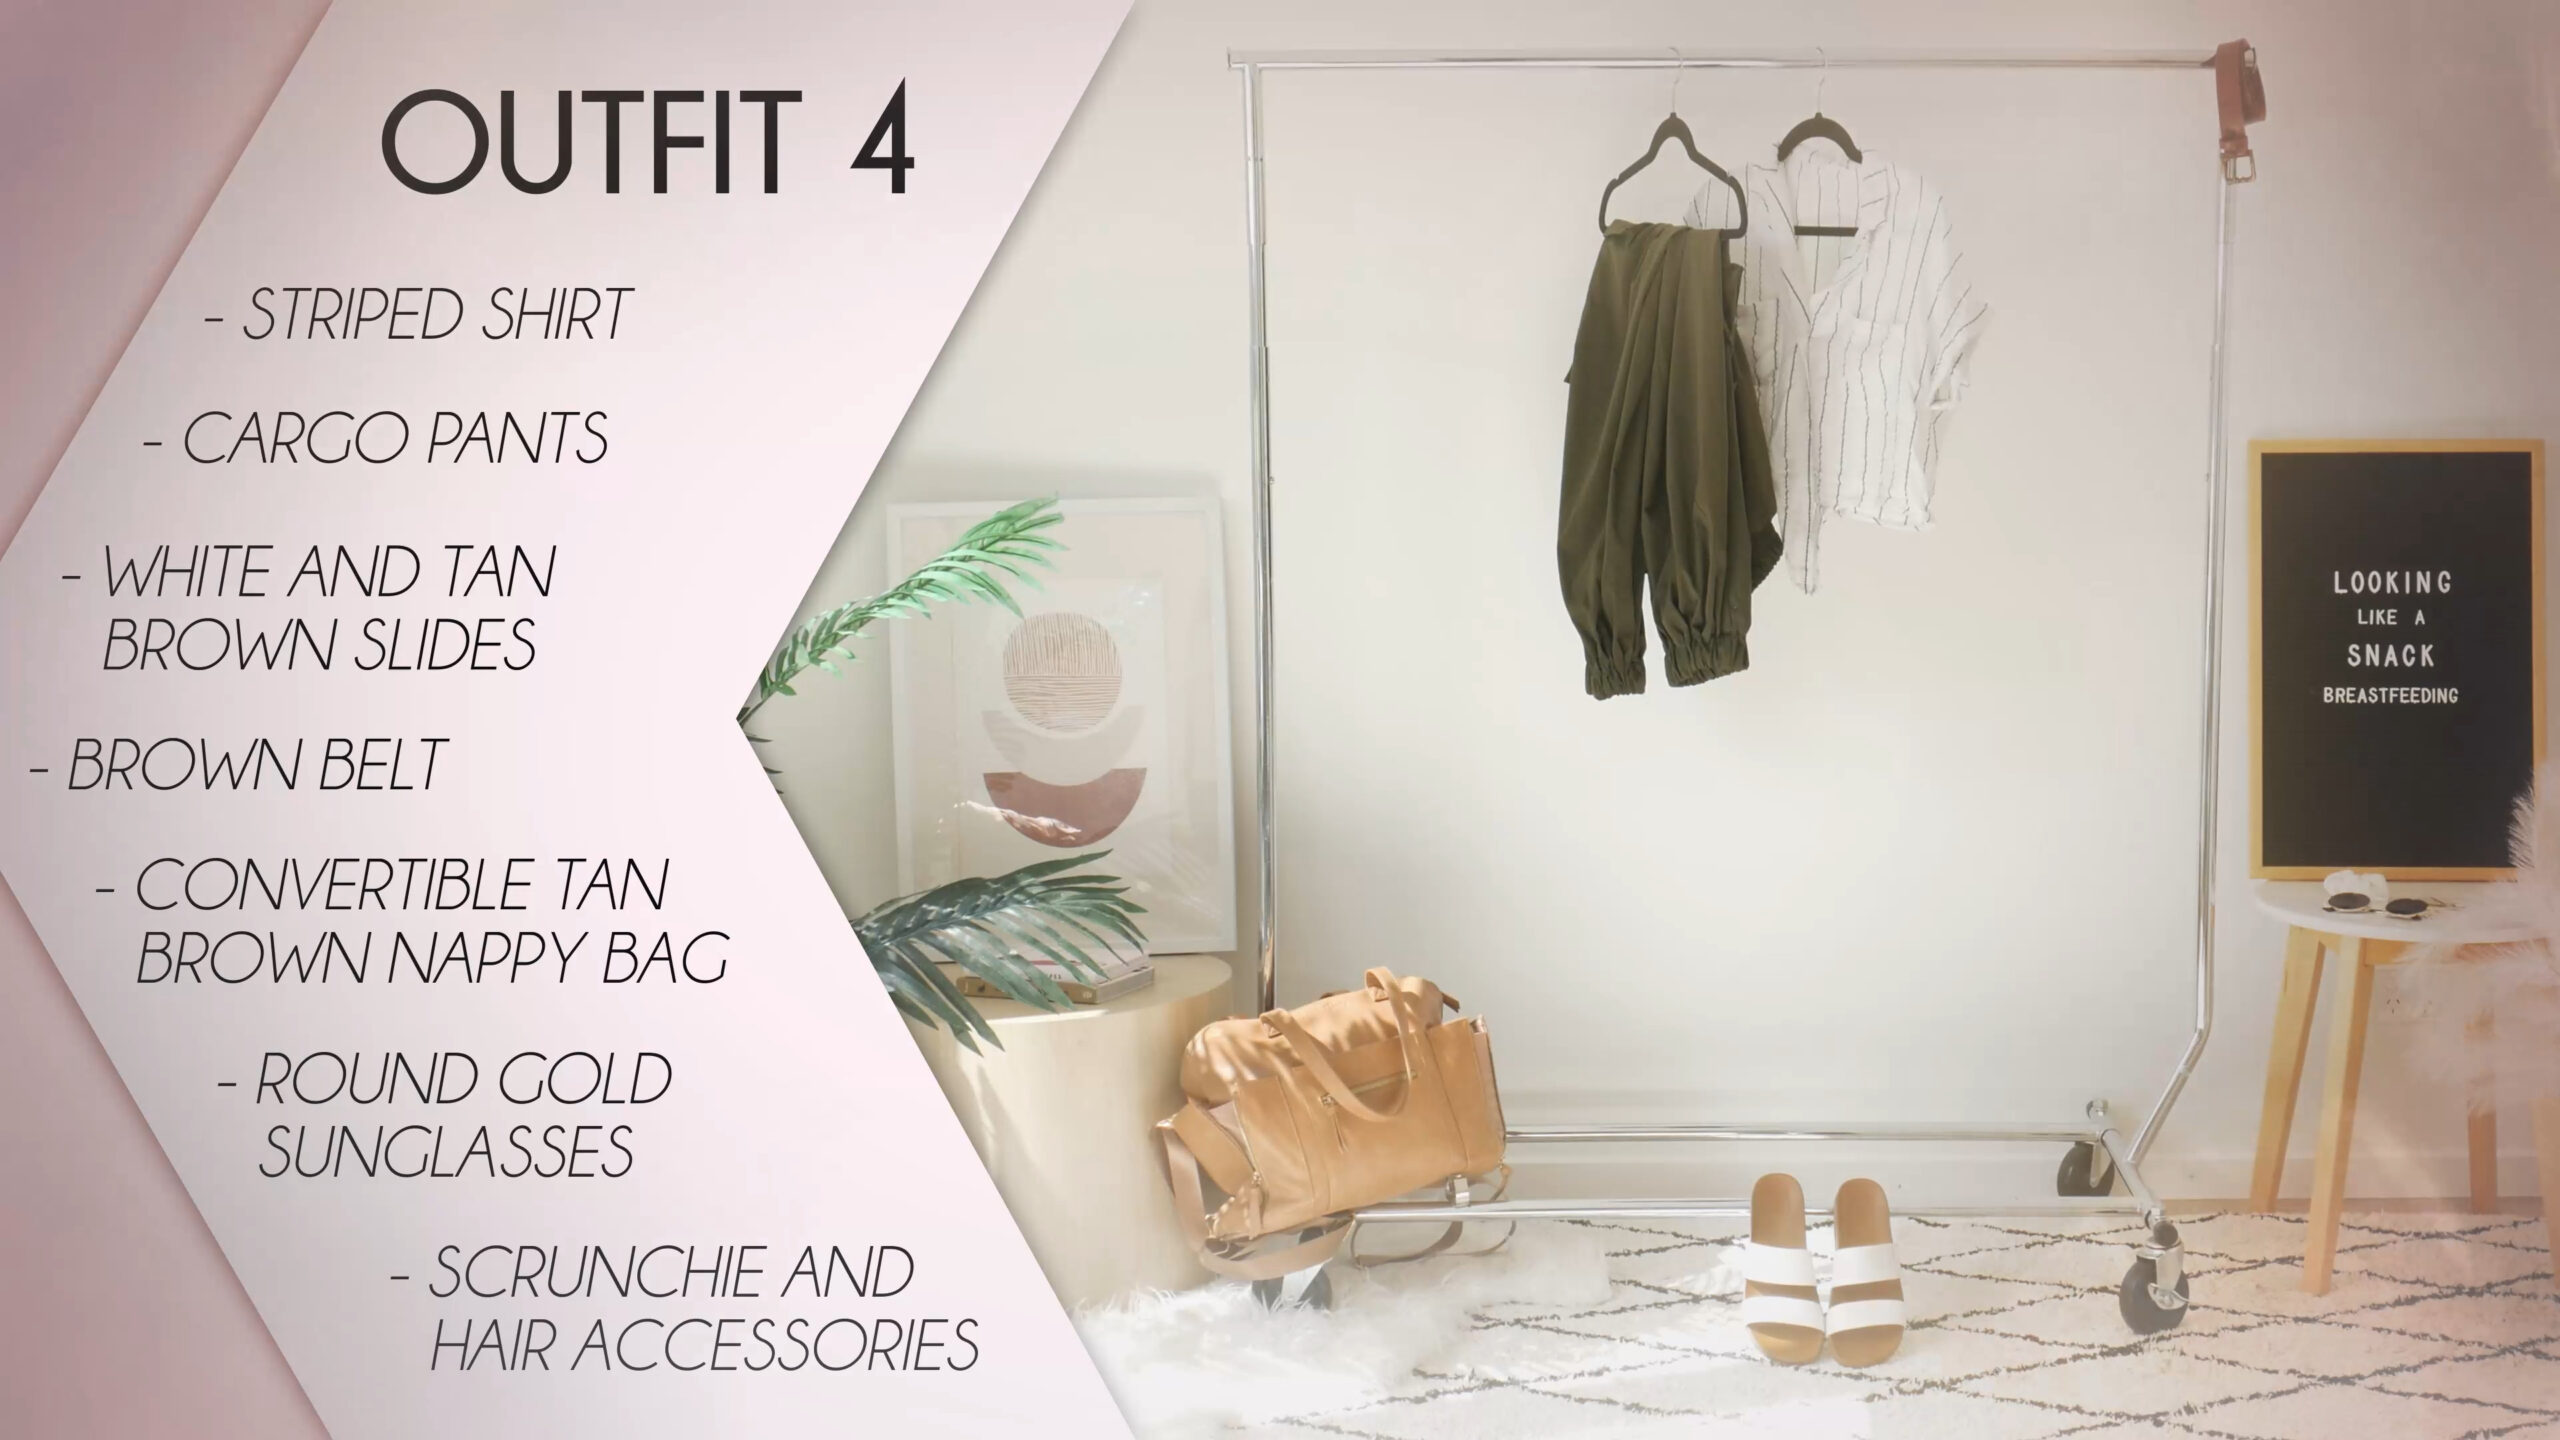 Outfit 04 Rack Formula